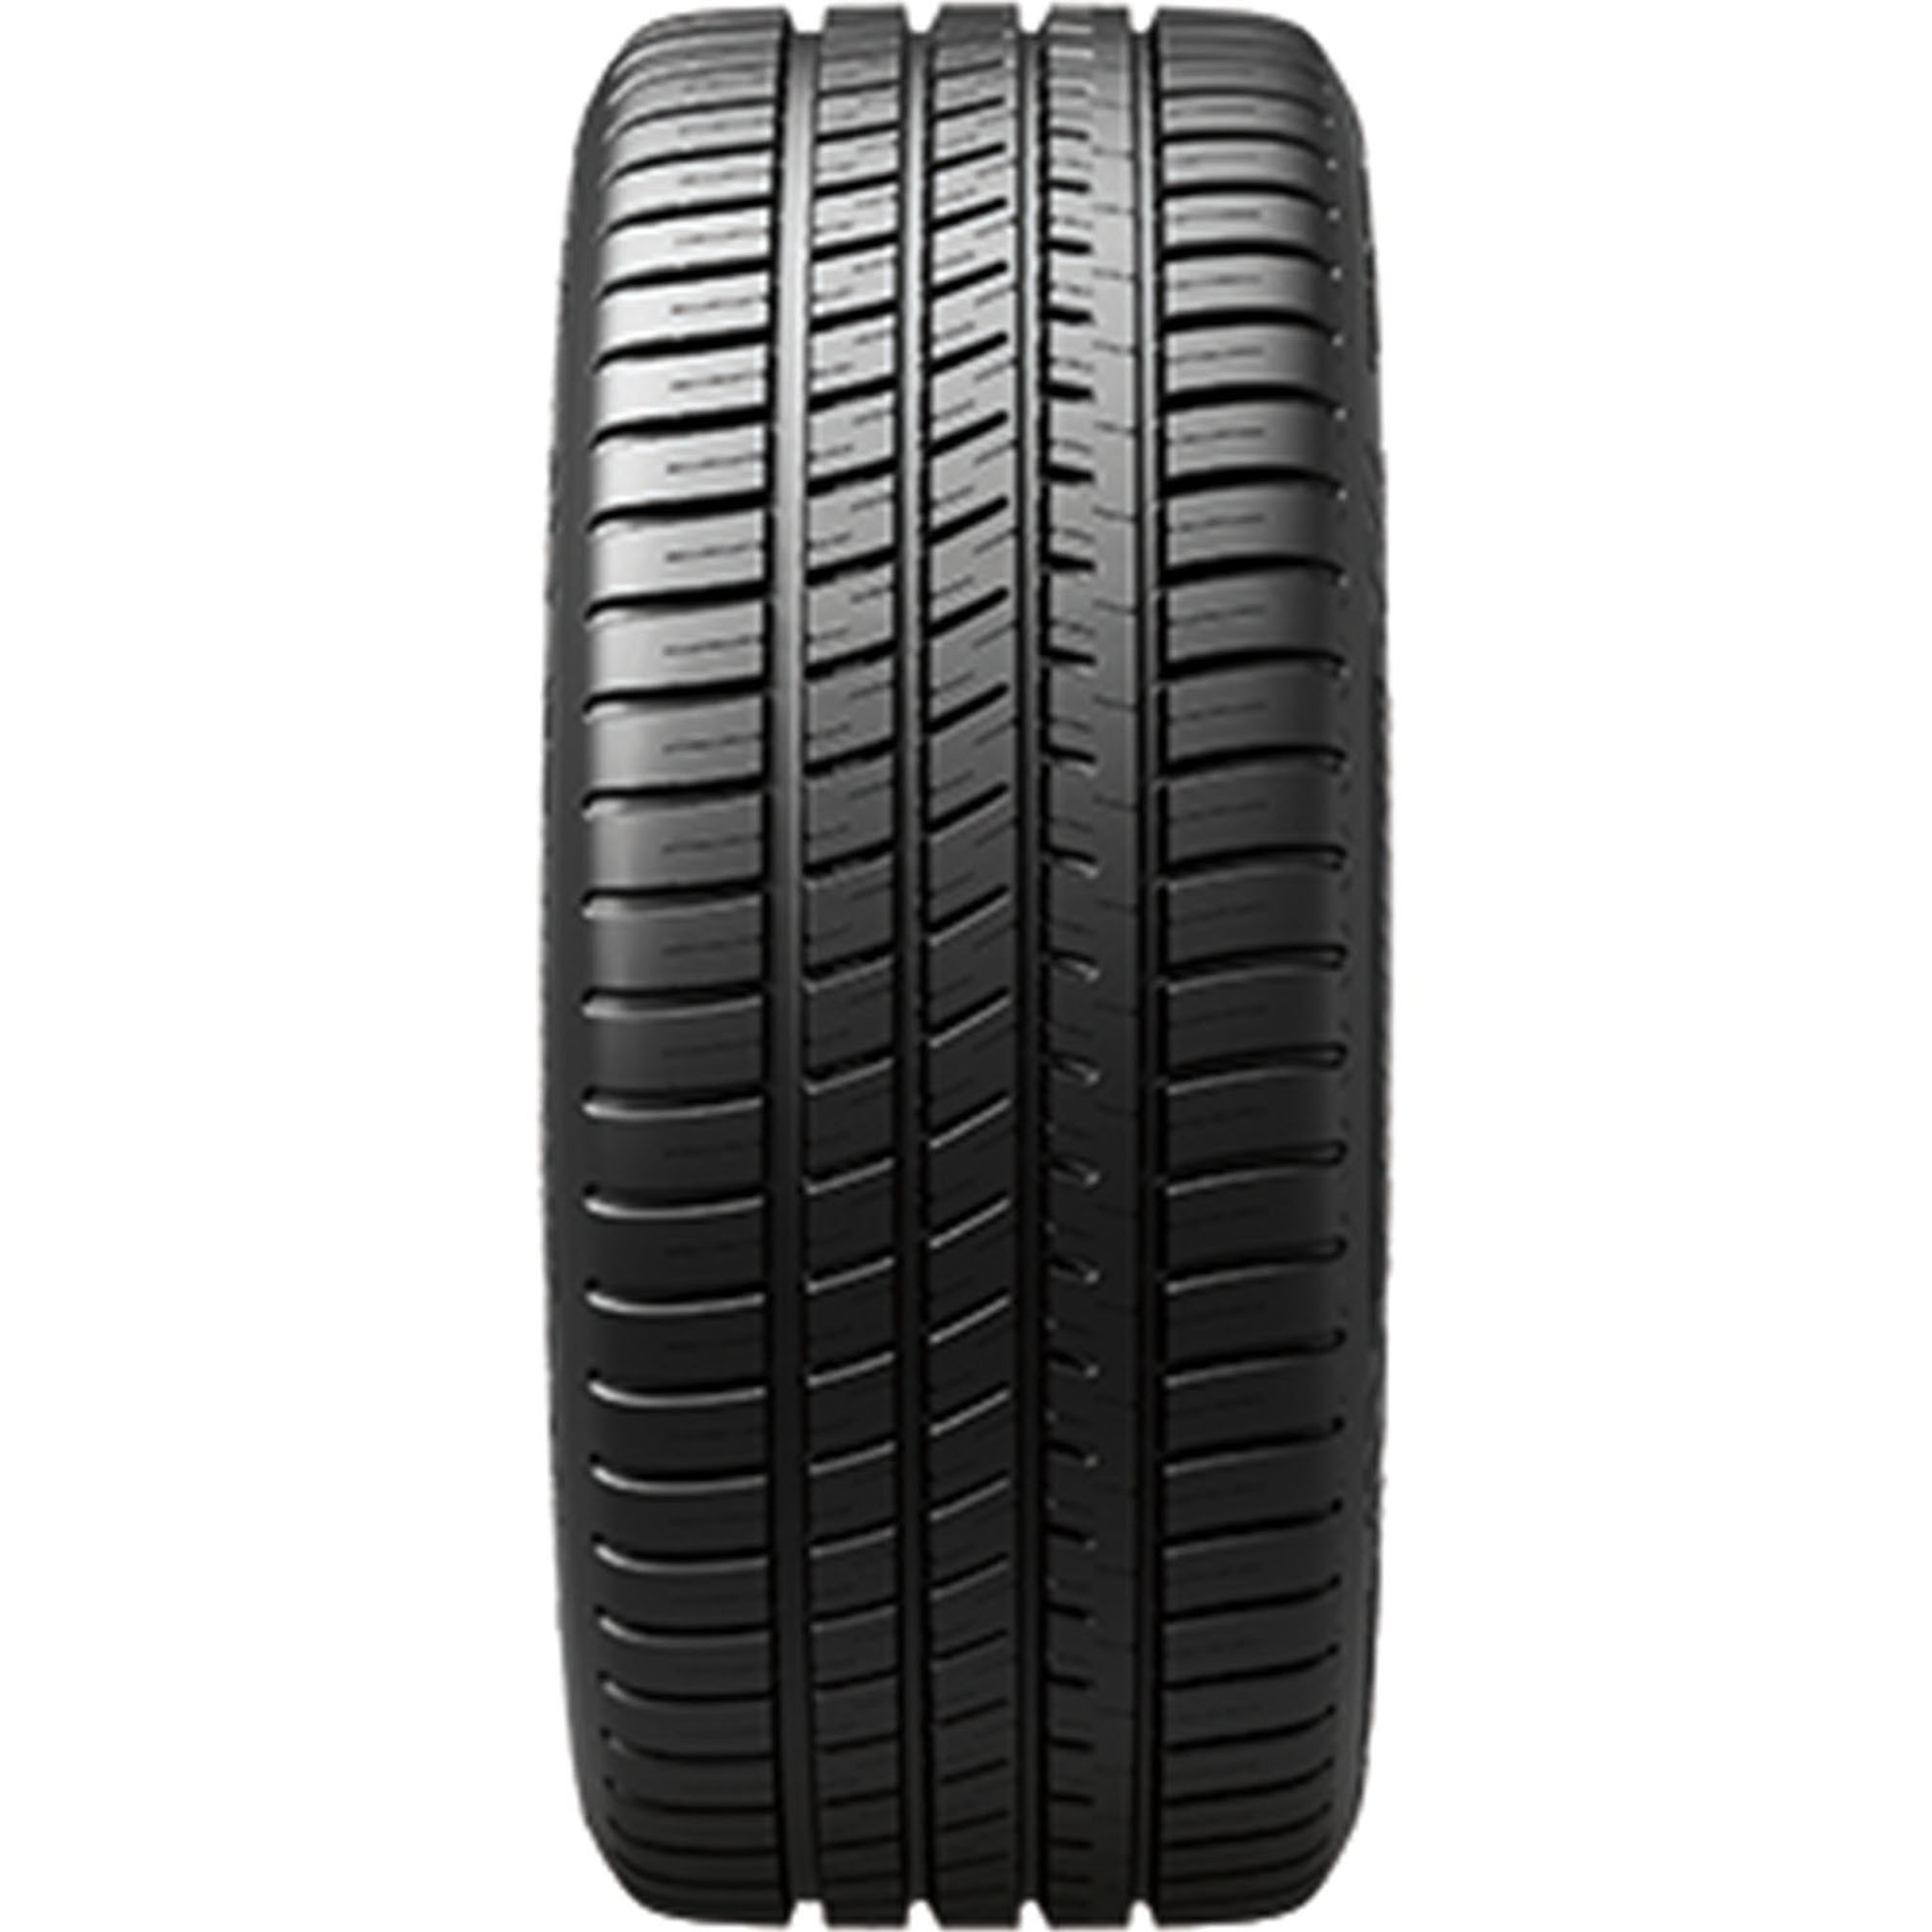 Michelin Pilot Sport A/S 3+ UHP All Season 235/55ZR19 105Y XL Passenger Tire - image 3 of 4